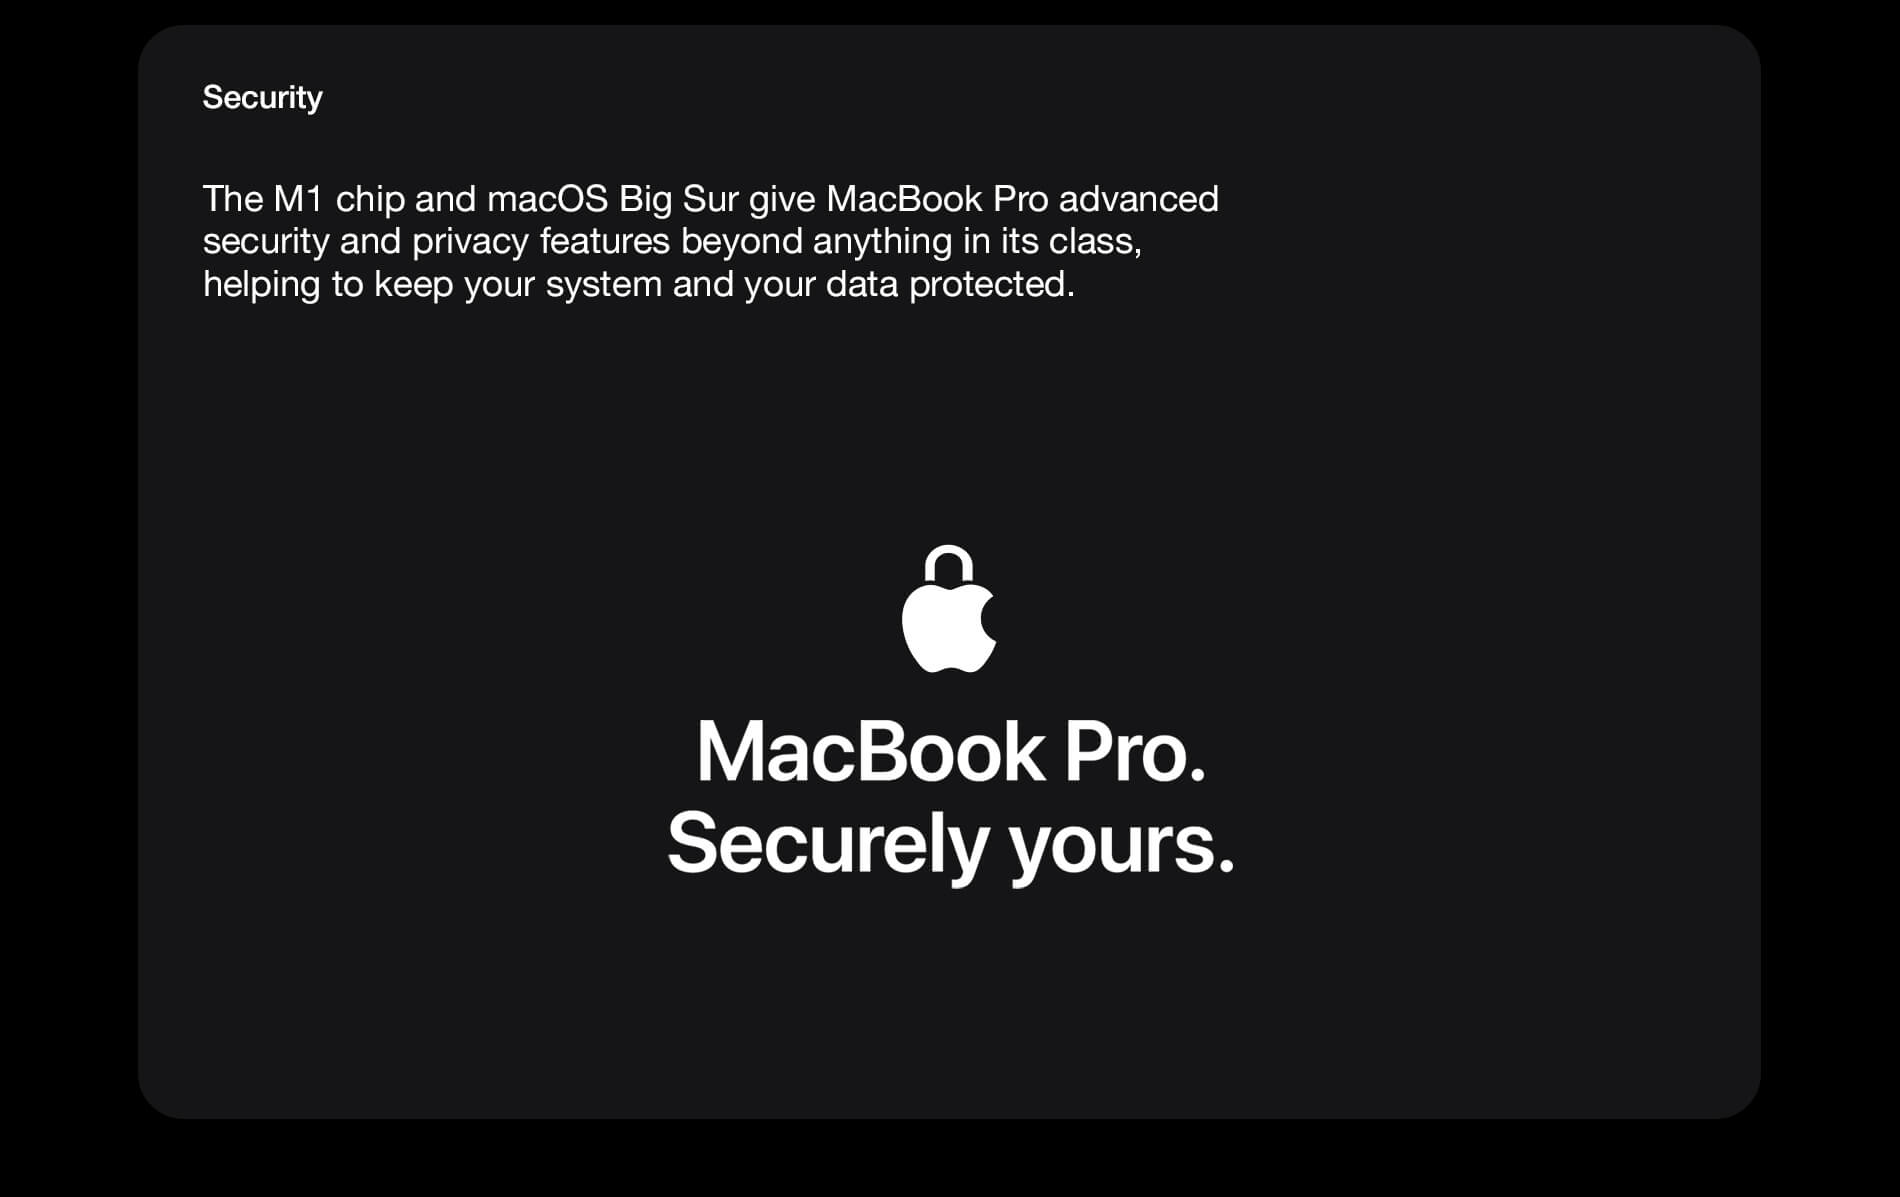 MacBook Pro. All systems Pro.